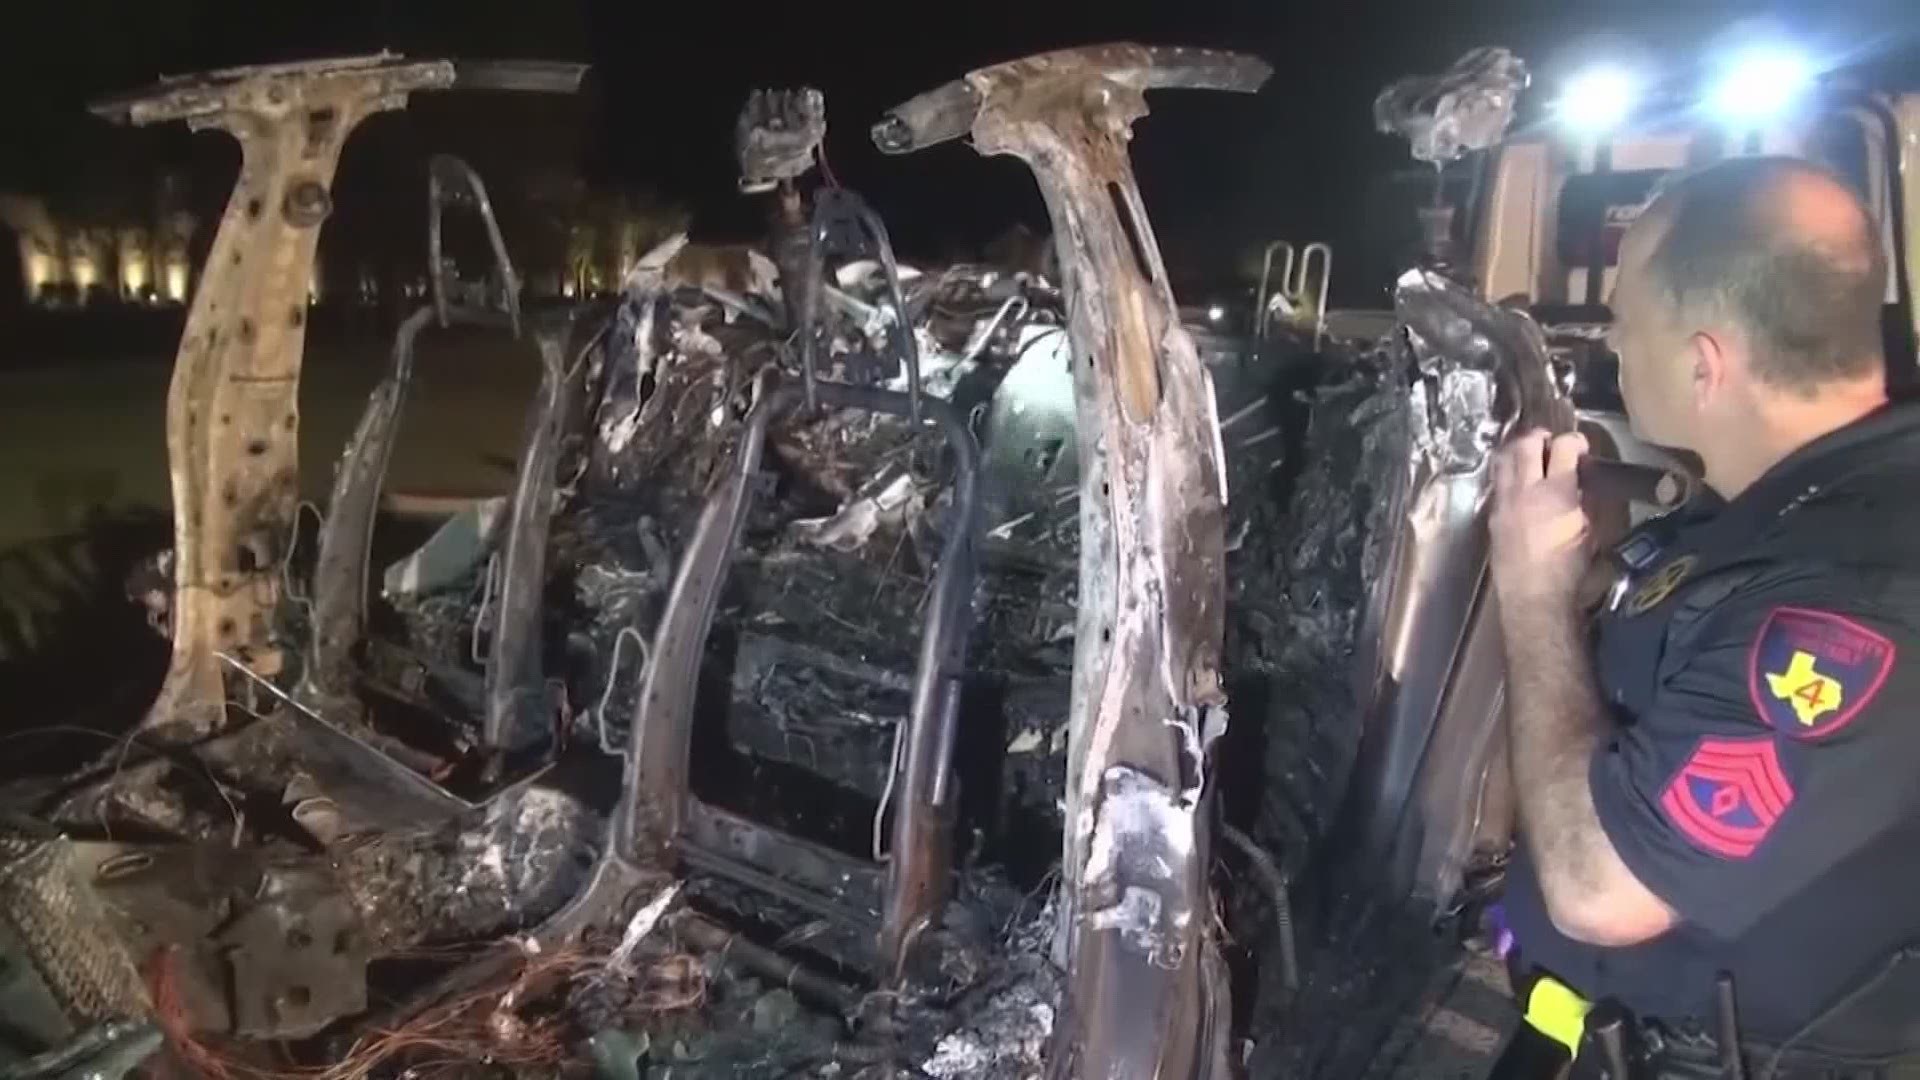 The company said it believes someone was likely in the driver's seat when the vehicle crashed.